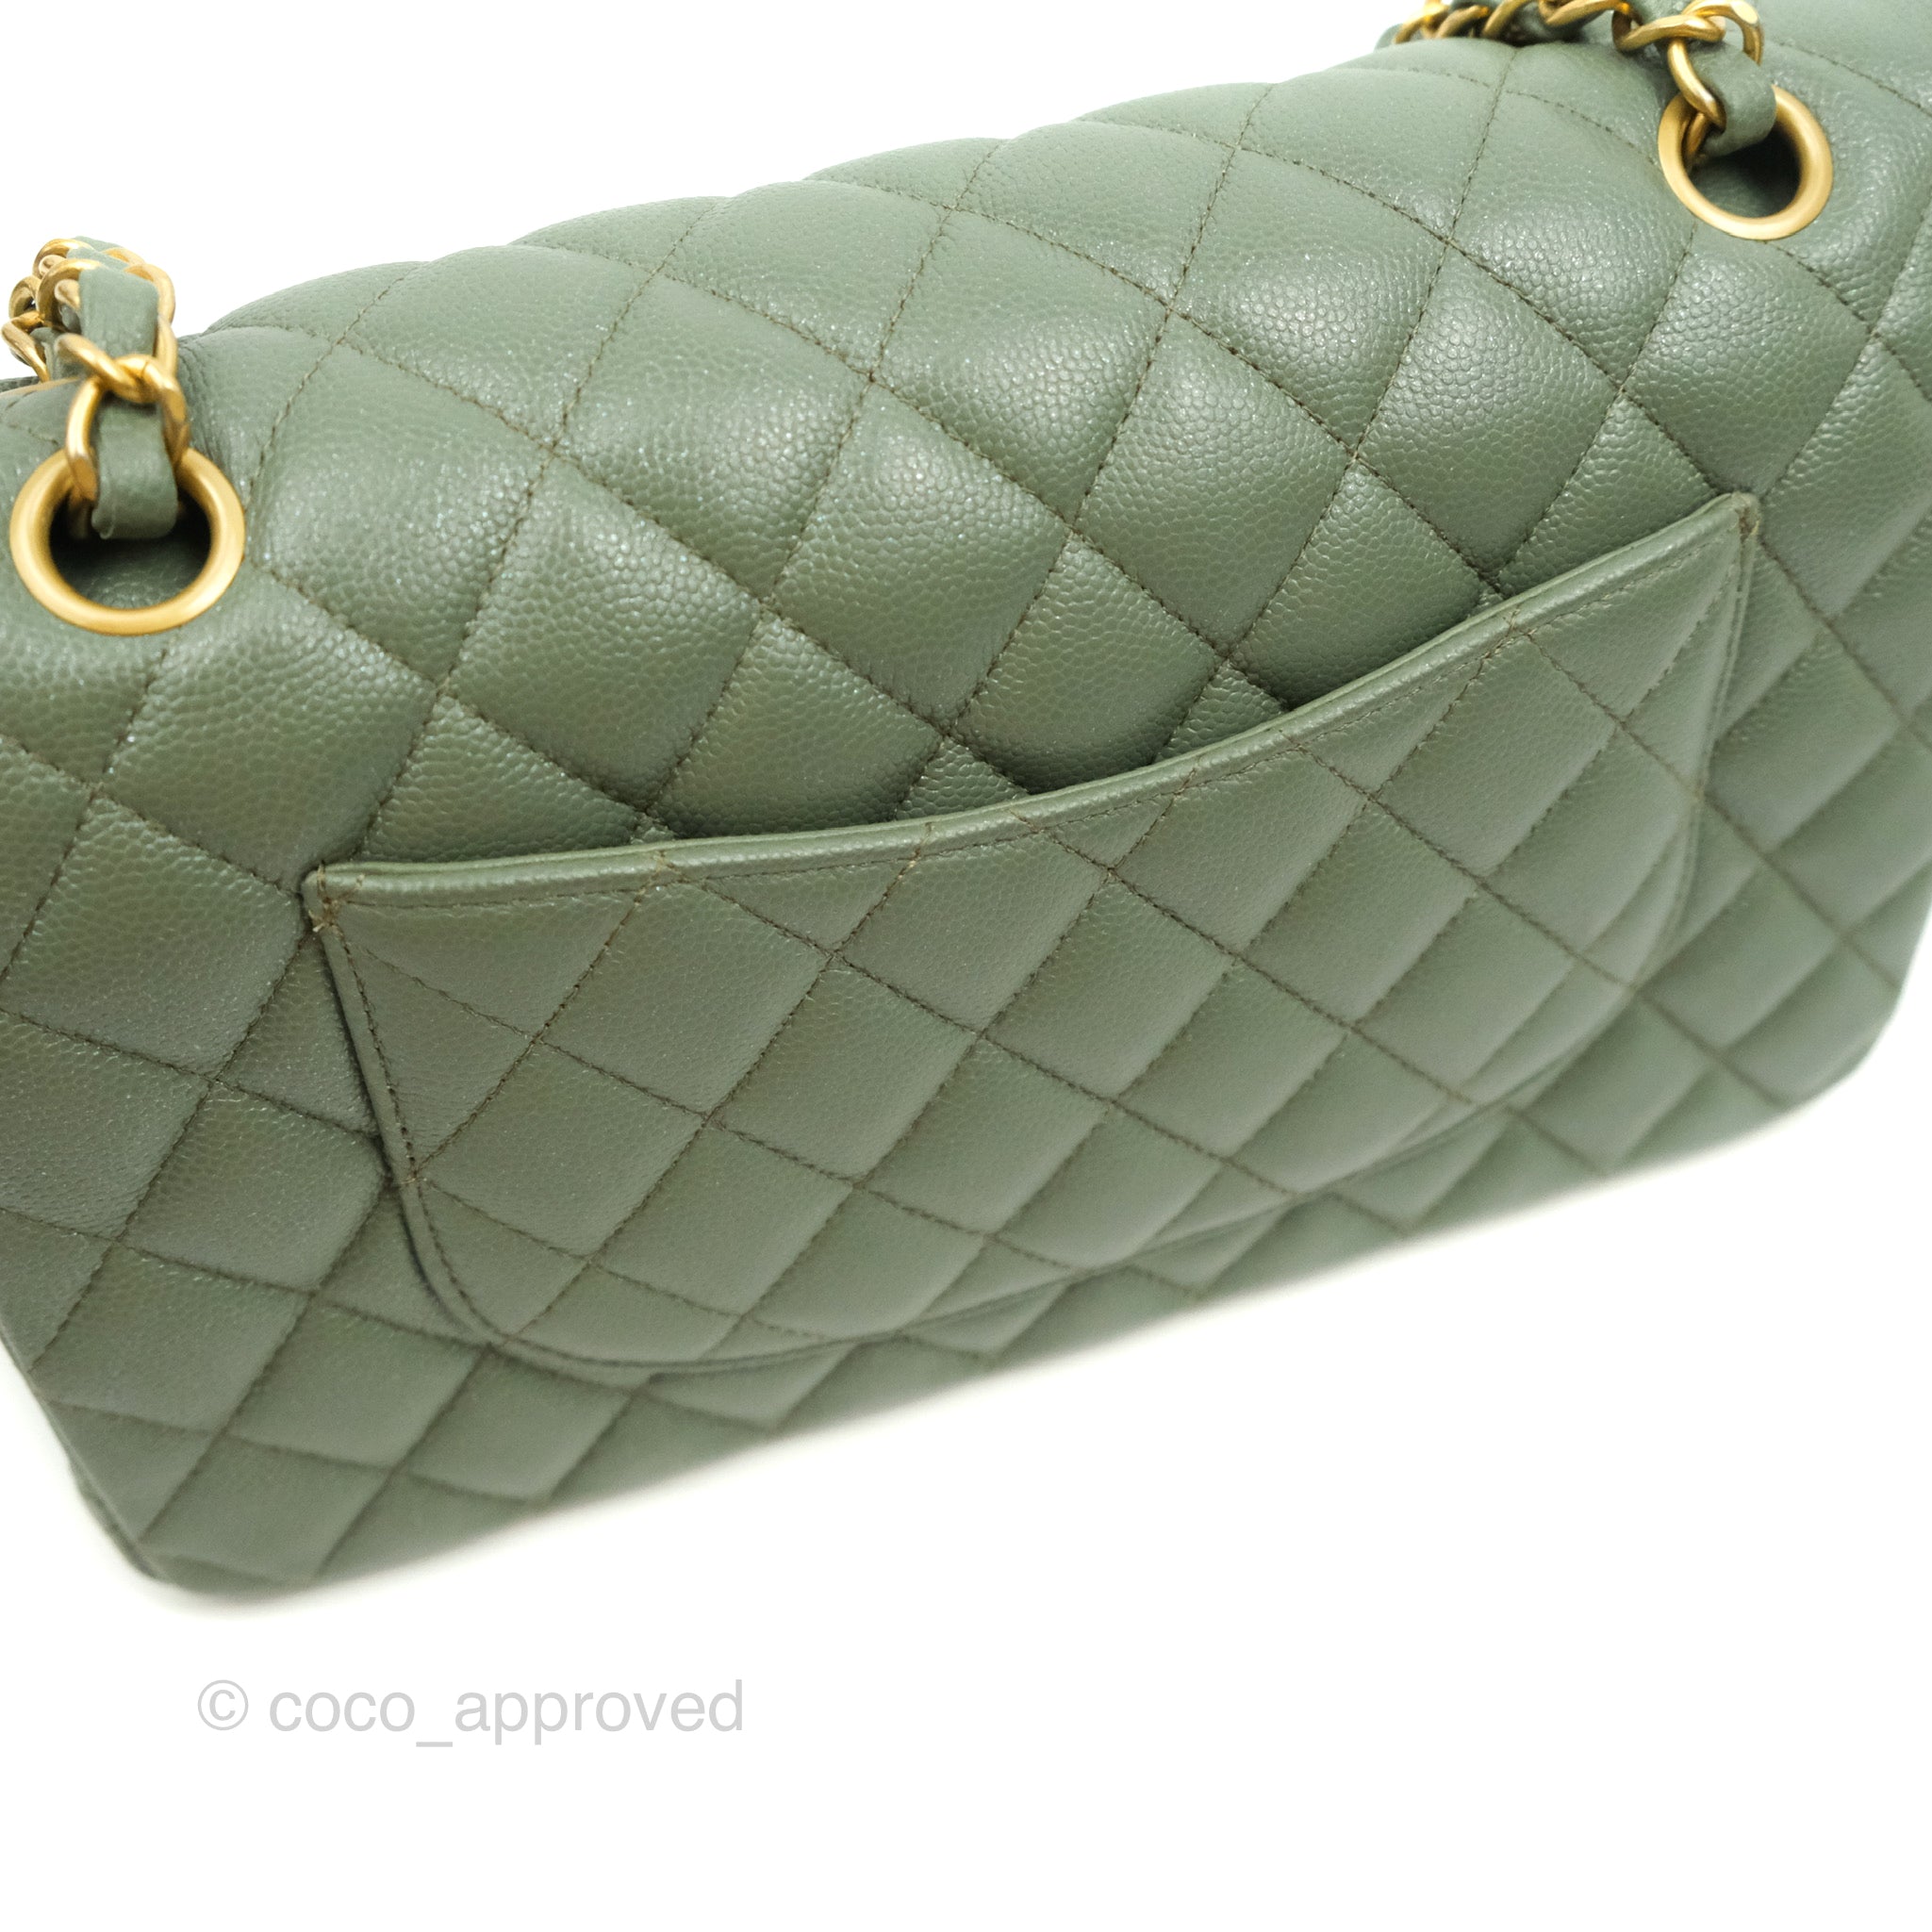 Chanel Green Quilted Caviar Medium Double Flap Bag Light Gold